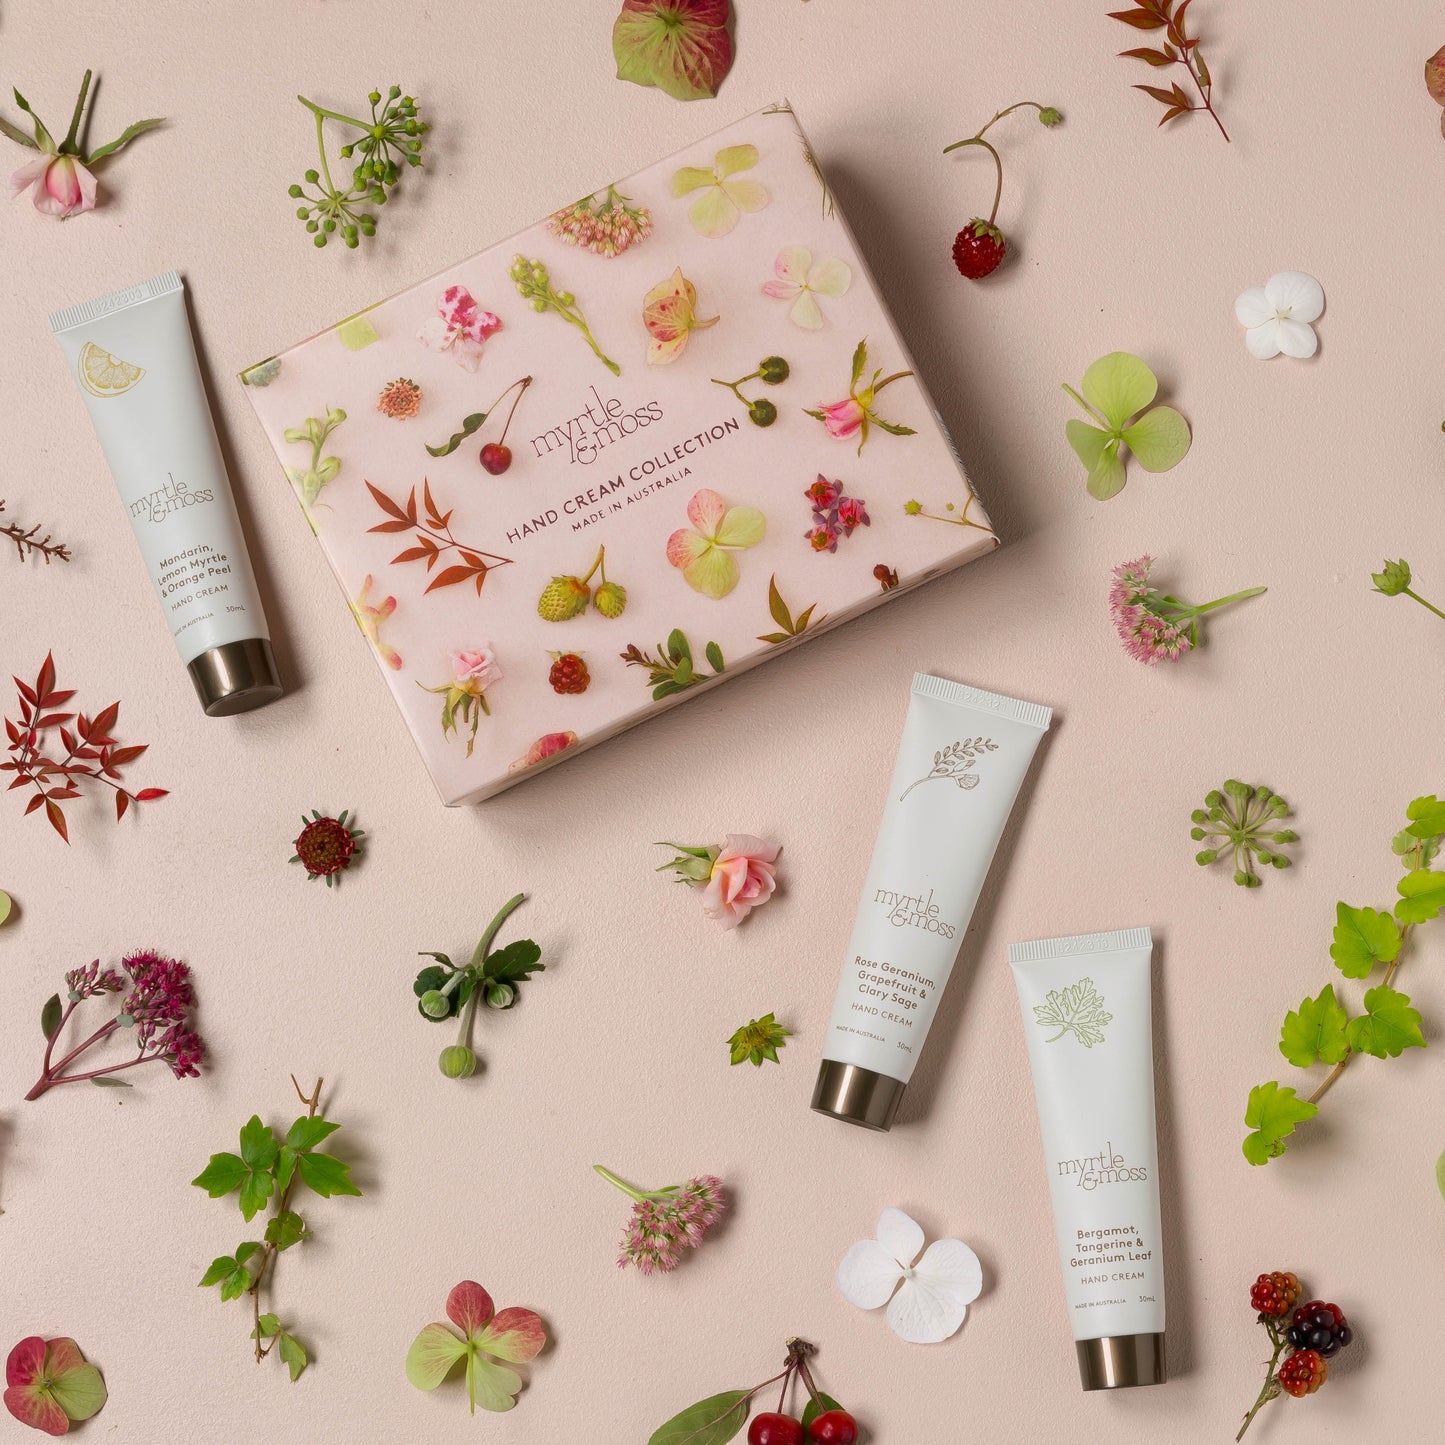 Hand Cream Collection┃Myrtle & Moss